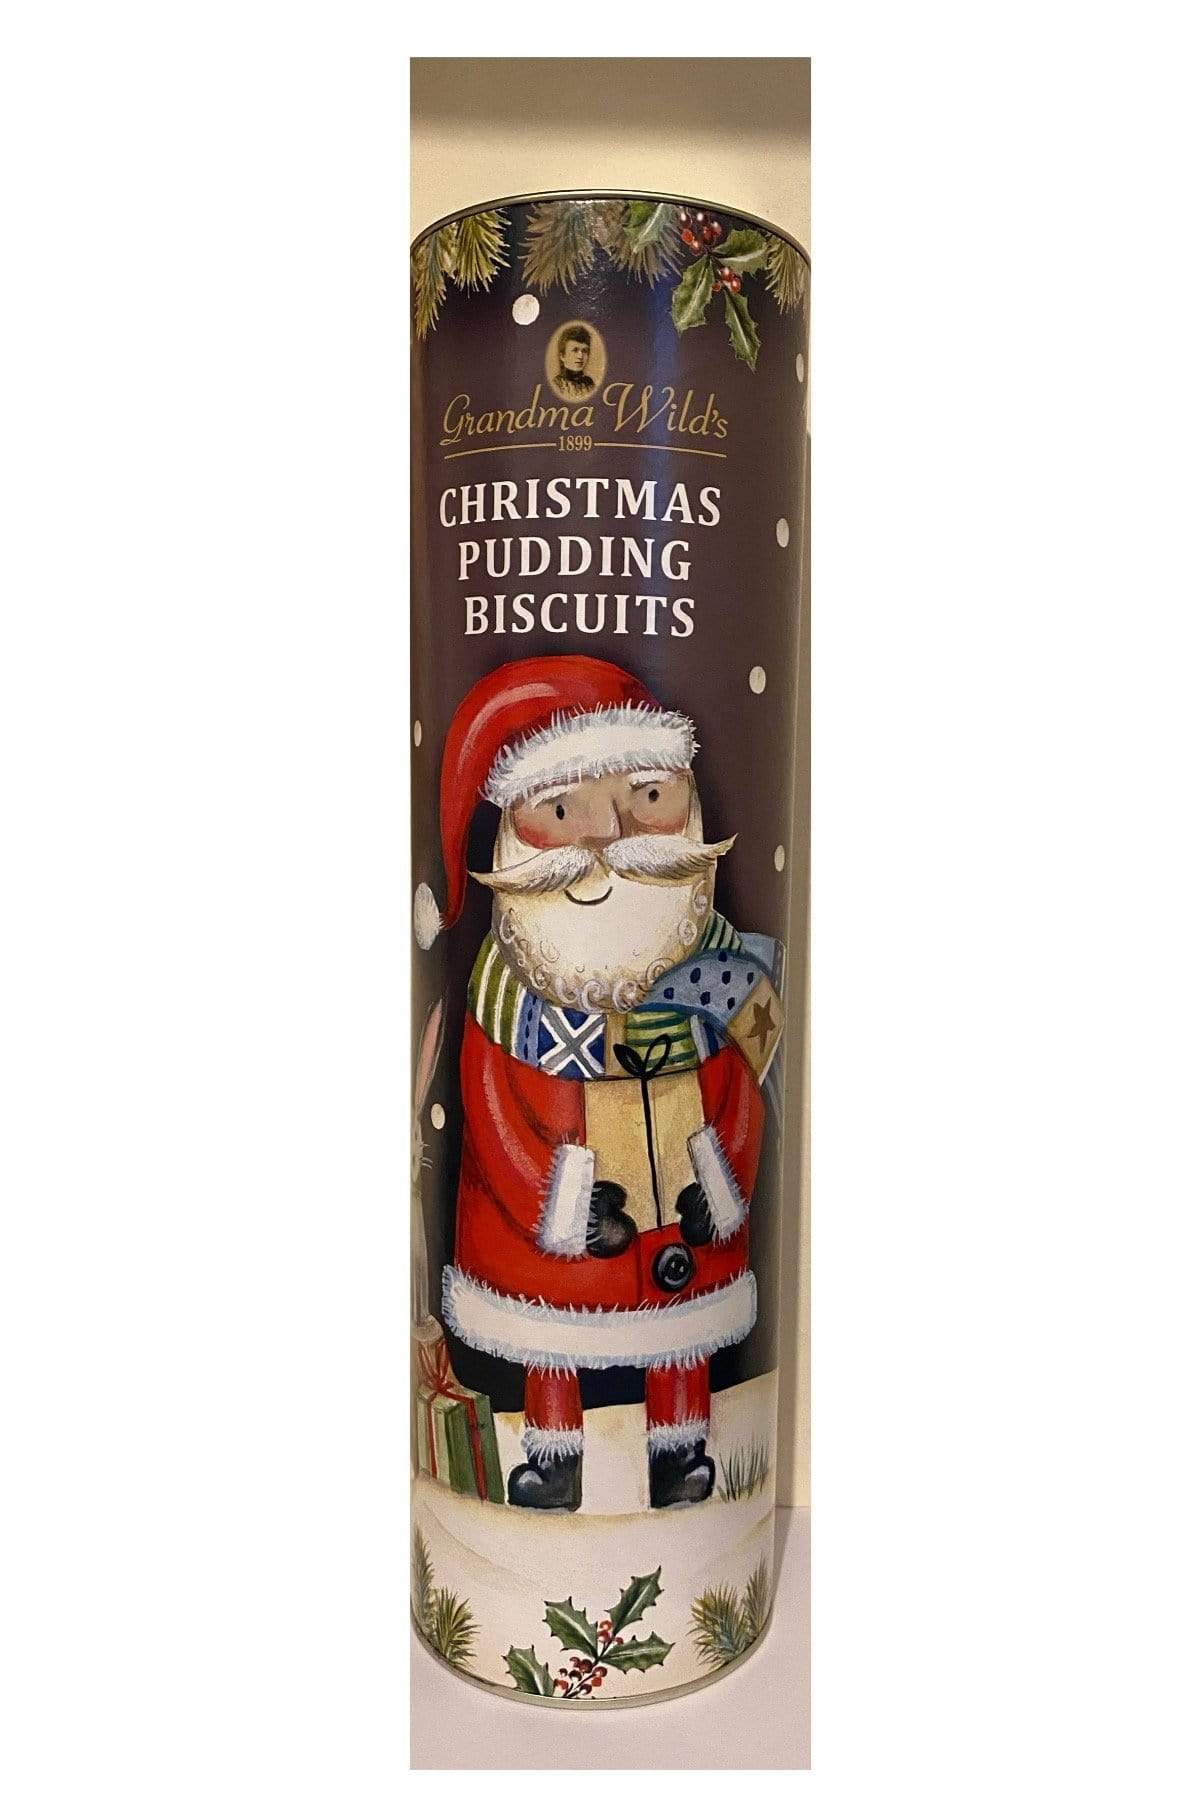 Grandma Wild's Biscuits Gift tins Giant Festive Santa Biscuit Tube Christmas Pudding Biscuits 200g